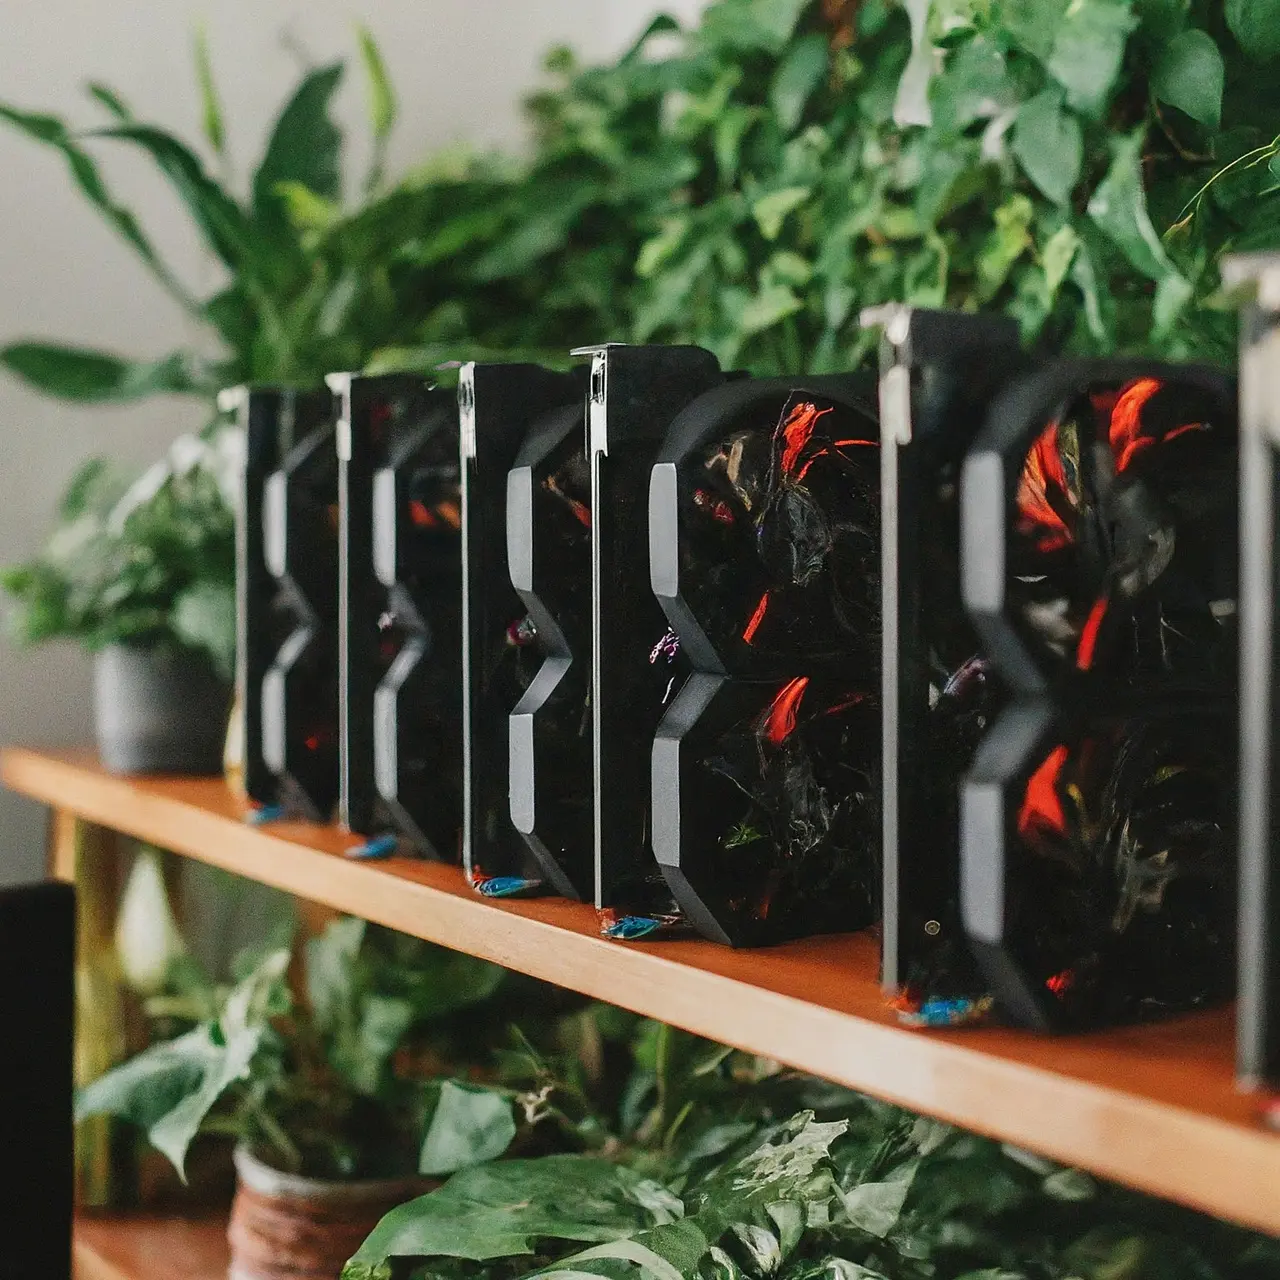 A computer setup with multiple GPUs surrounded by green plants. 35mm stock photo